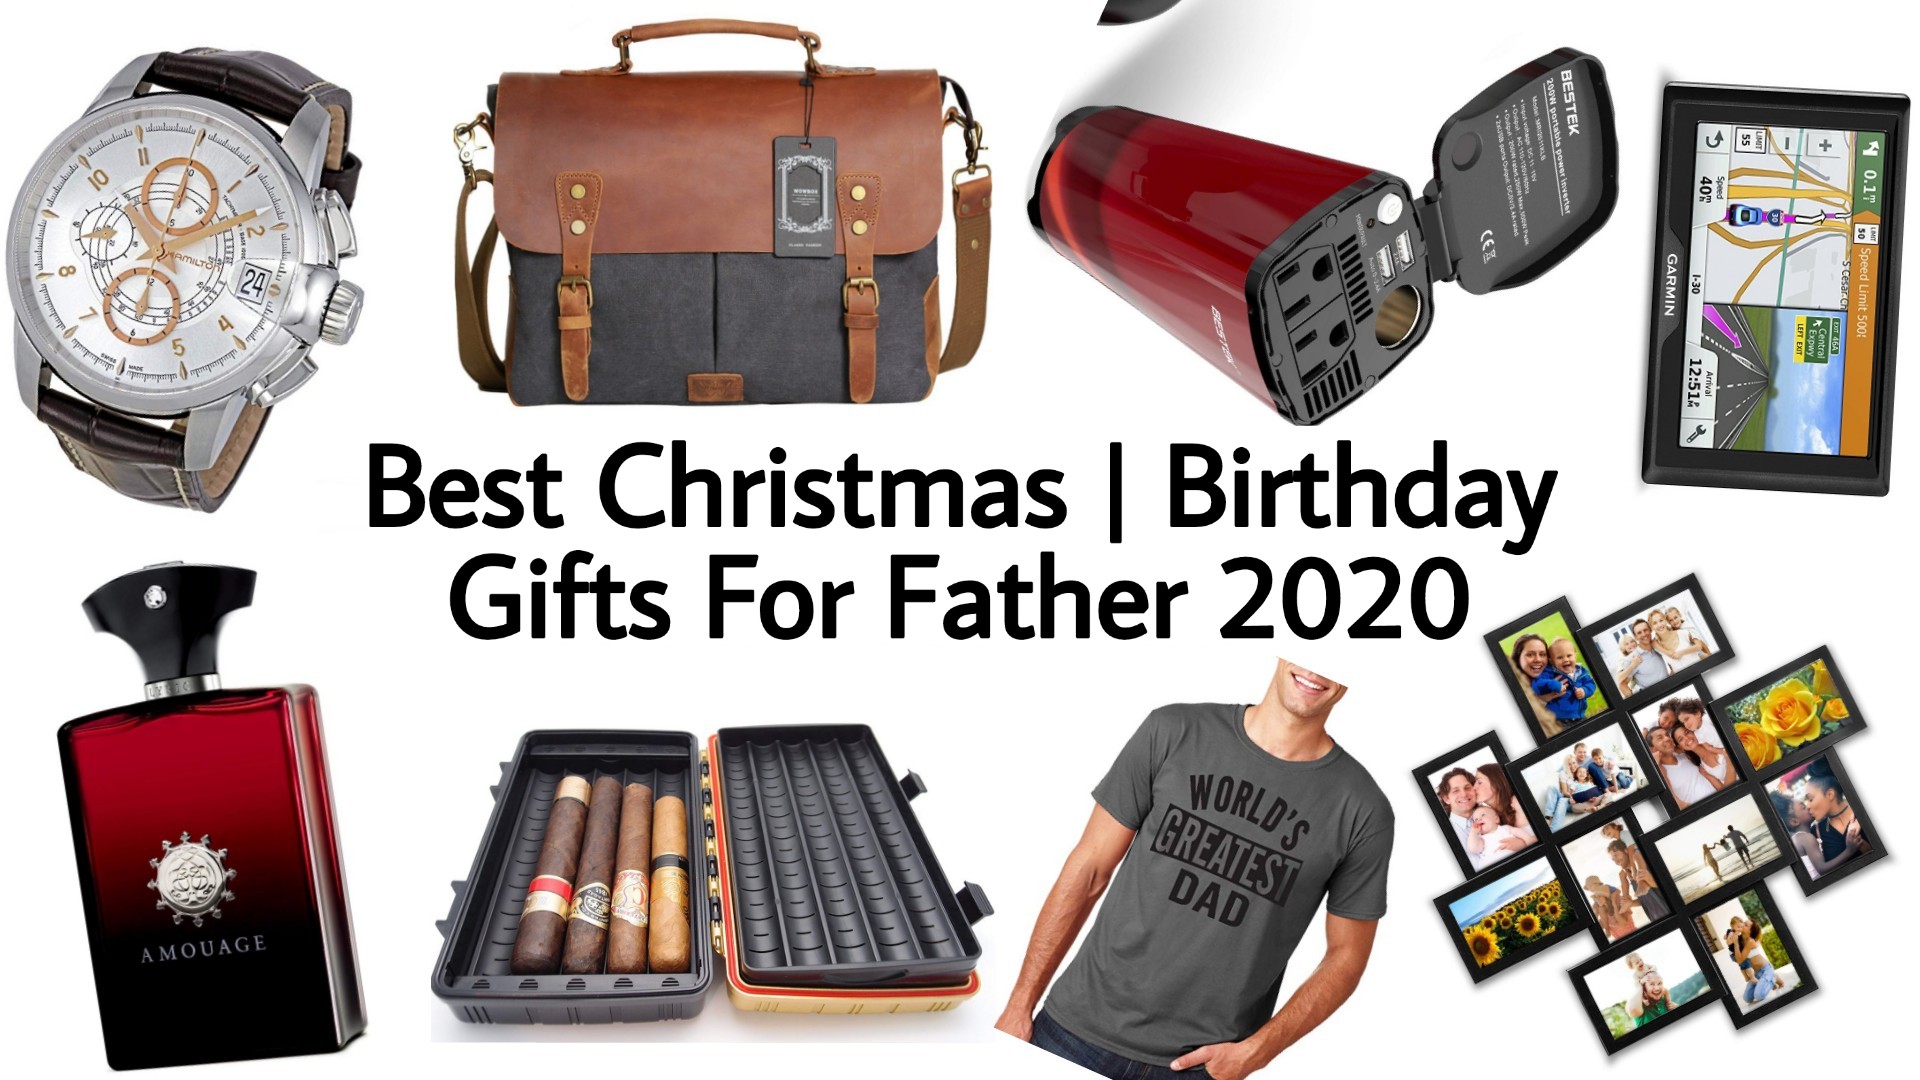 What To Get Dad For Christmas? Best 2020 Christmas Gifts For Da